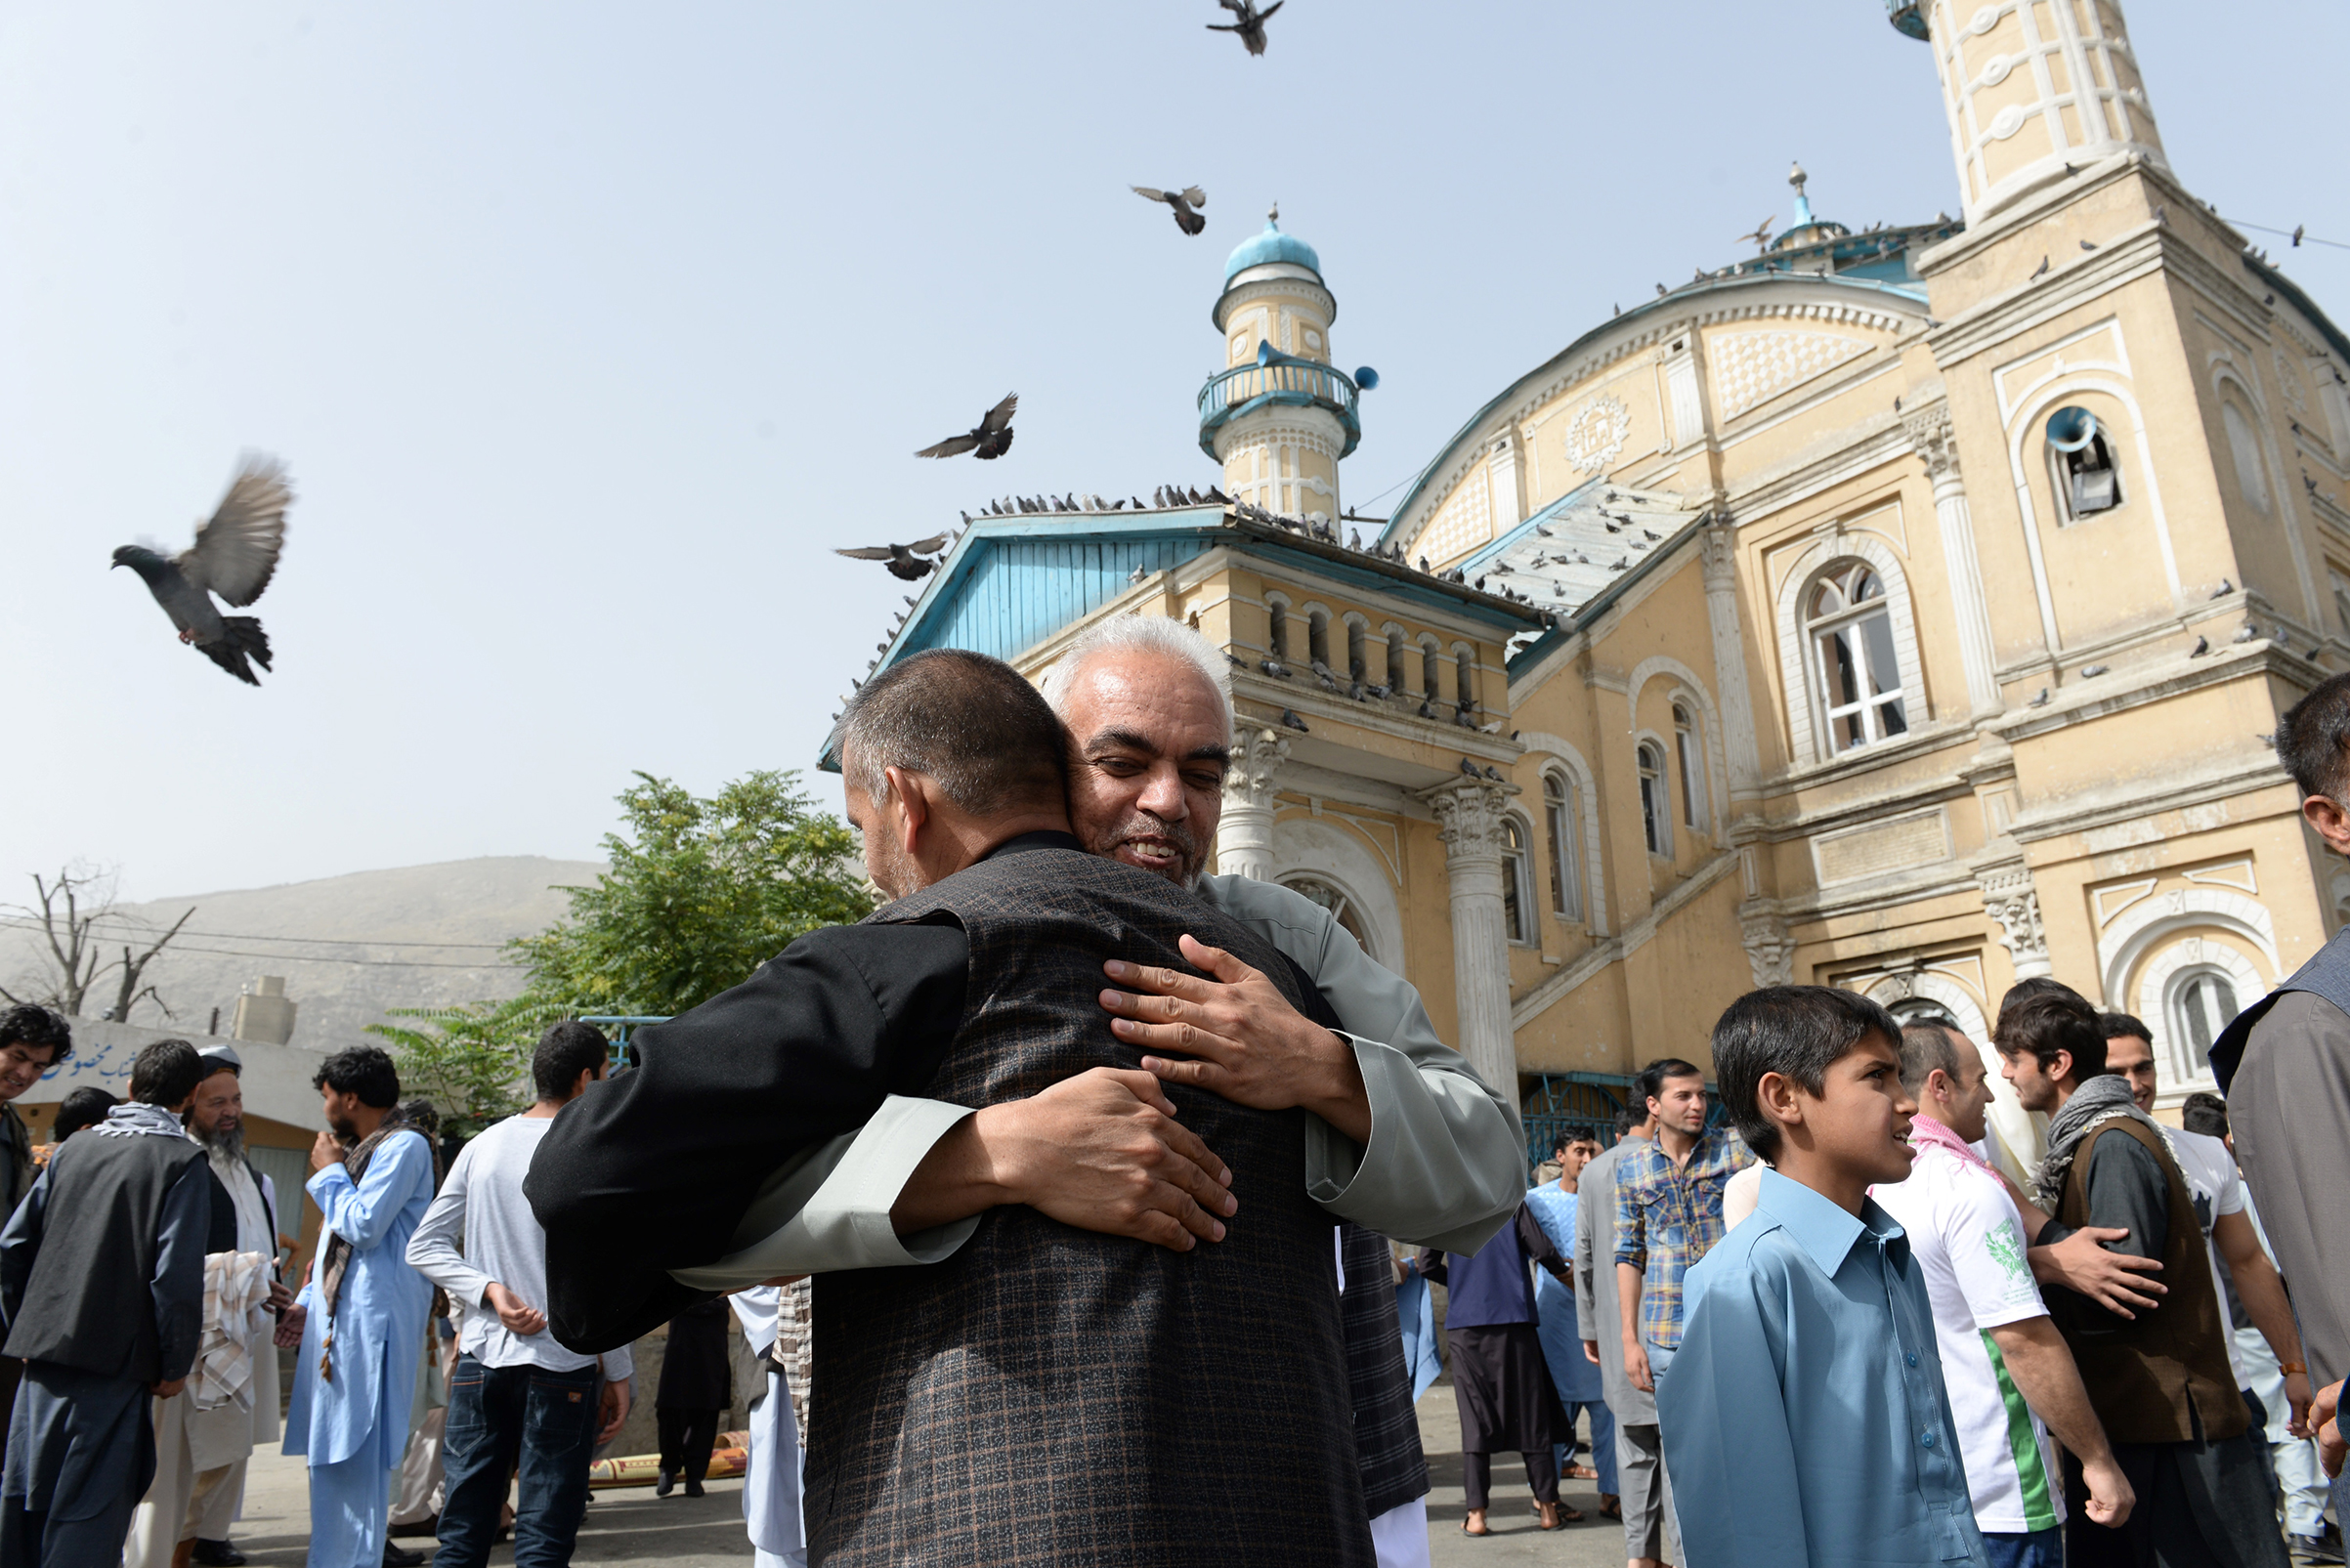 Afghan Muslims hug each other after offering prayers at the start of the Eid al-Fitr holiday which marks the end of Ramadan at the Shah-e Do Shamshira mosque in Kabul on June 15, 2018. (Noorullah Shirzada—AFP/Getty Images)